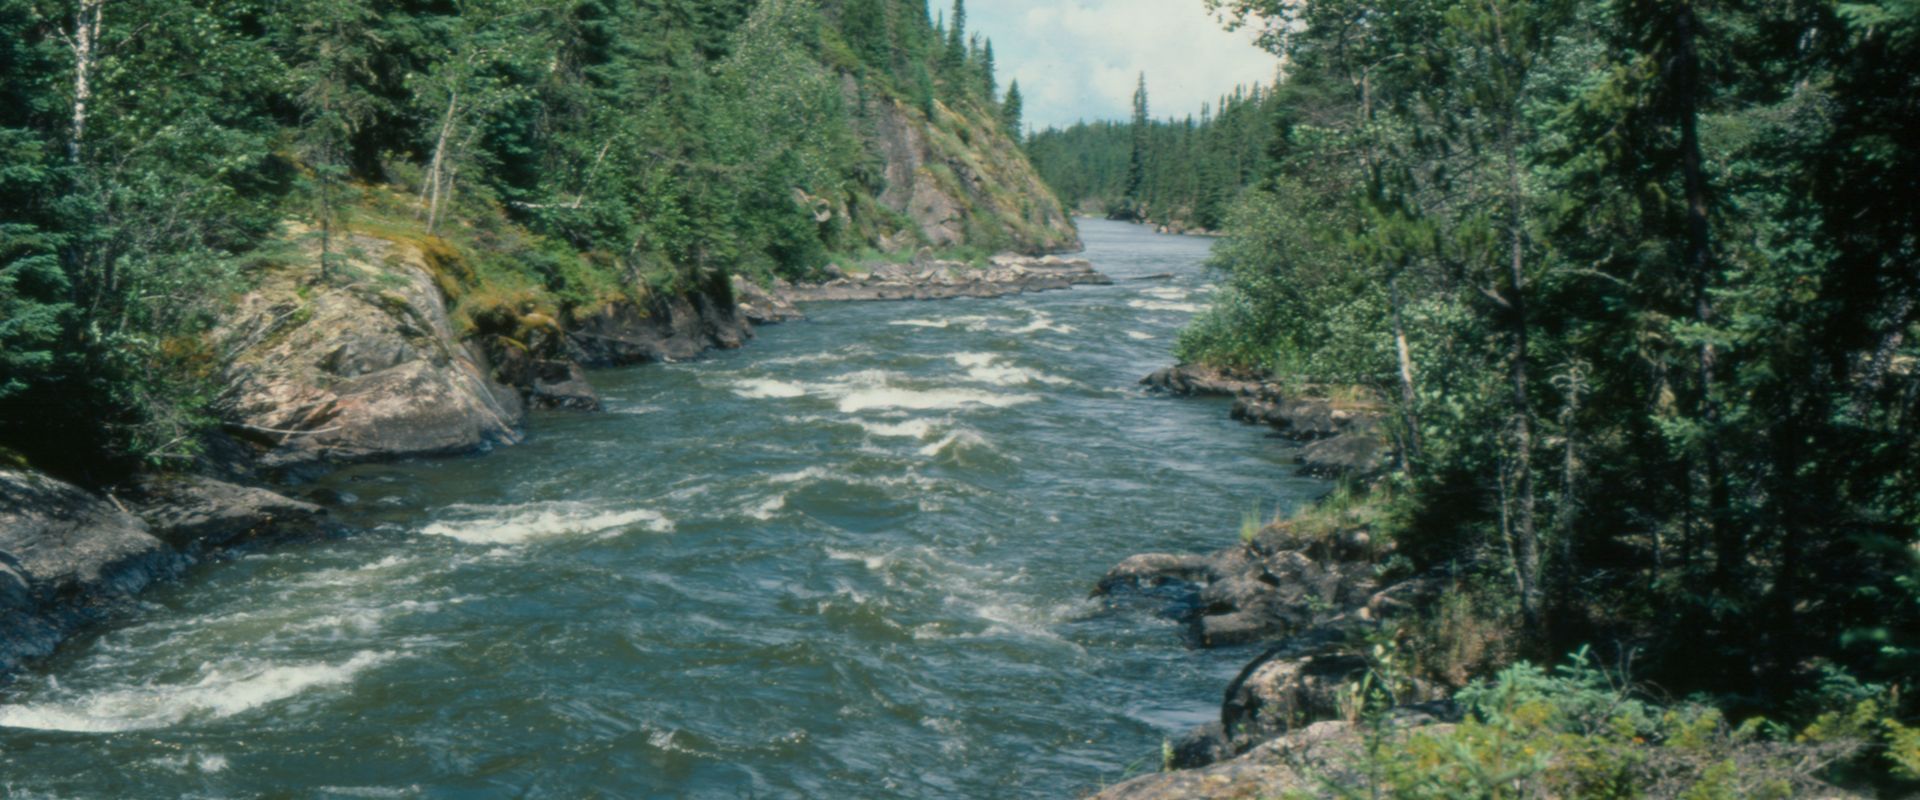 A view looking downstream at a stretch of rapids on the Hayes River.